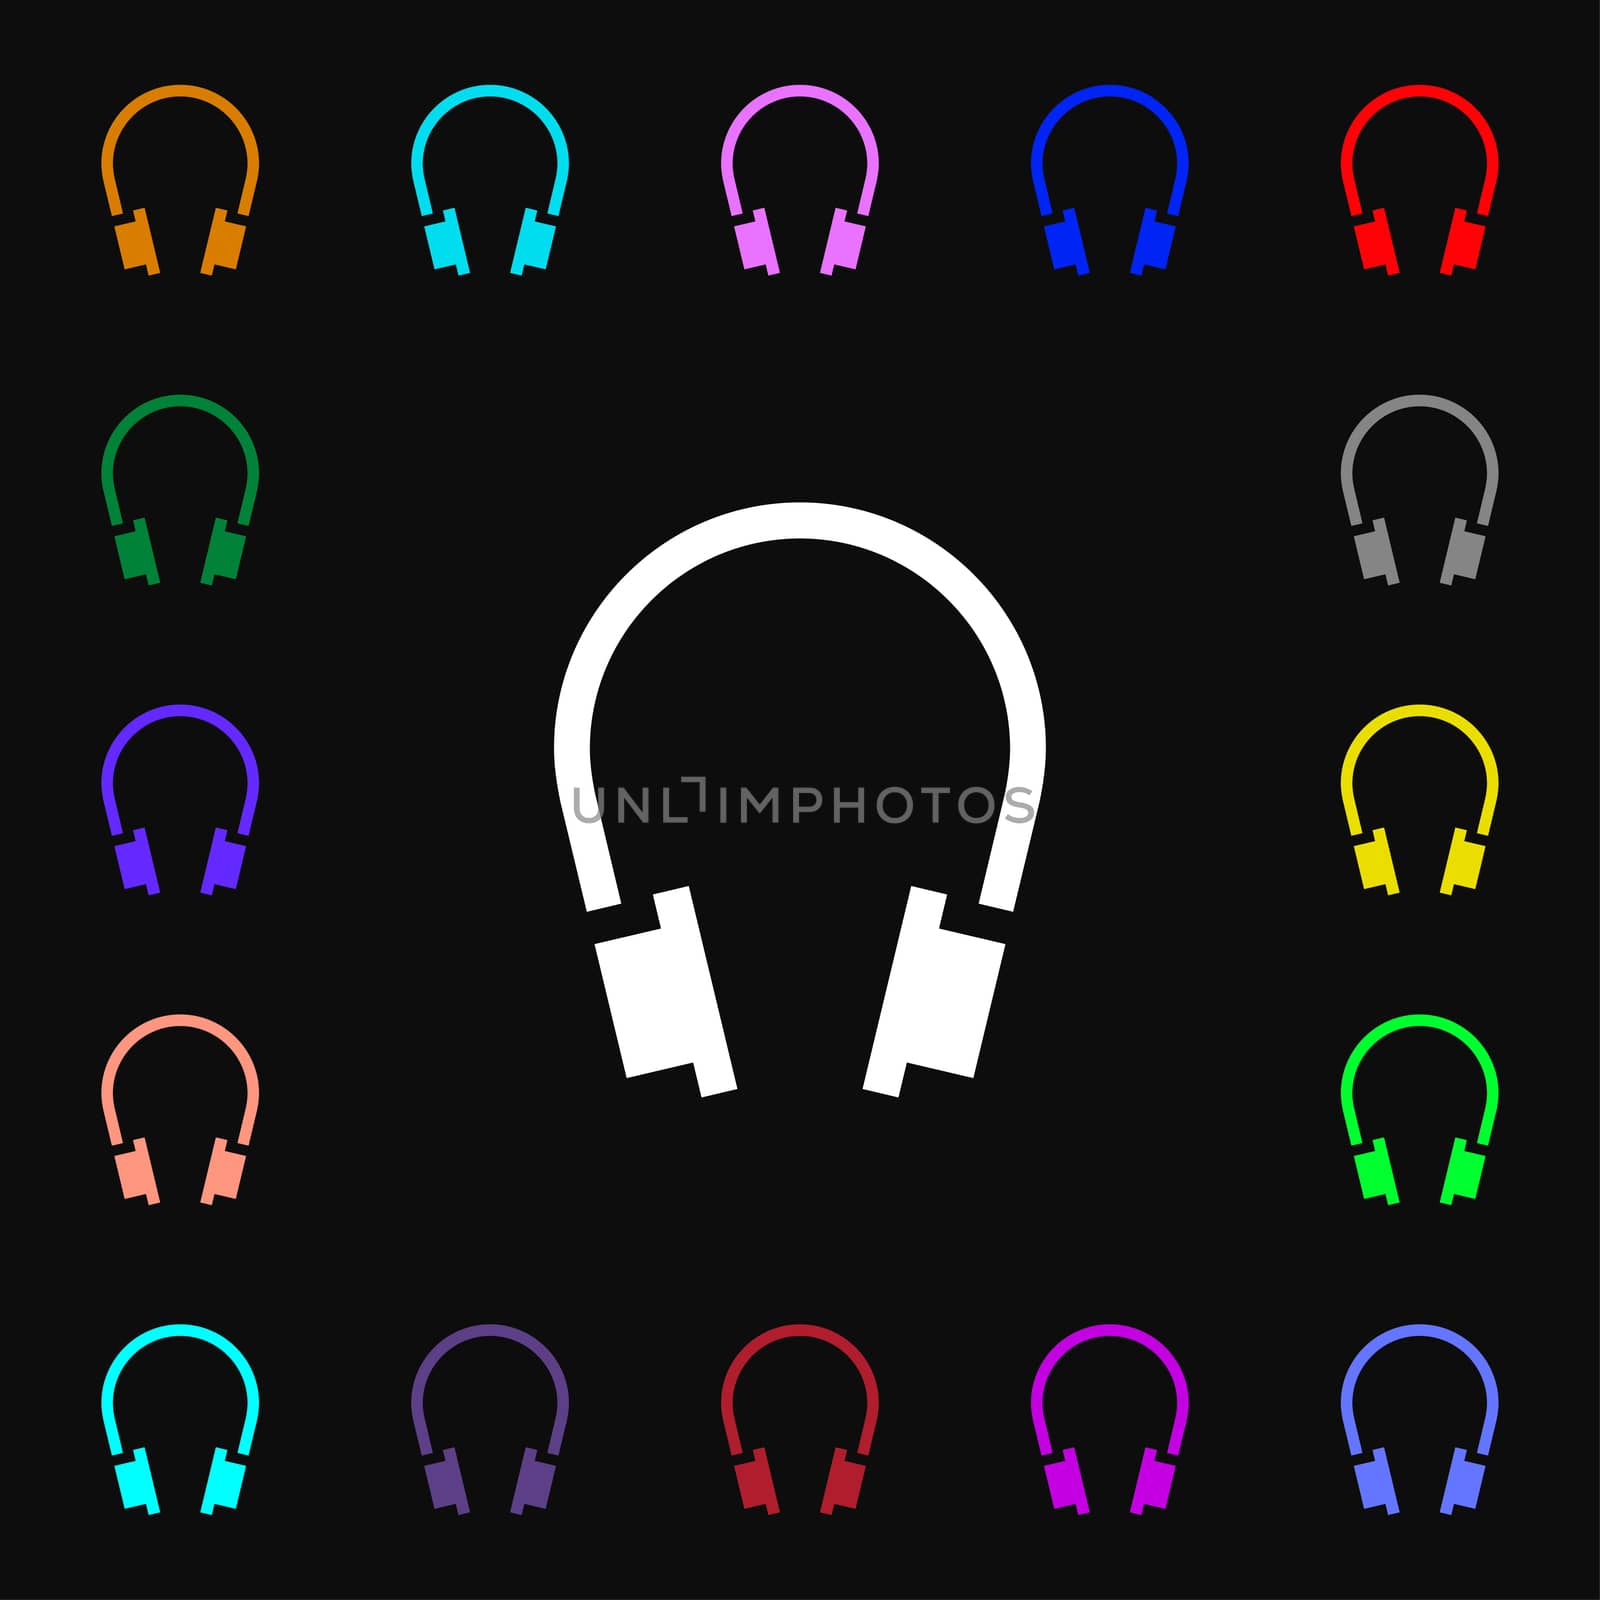 headsets icon sign. Lots of colorful symbols for your design. illustration